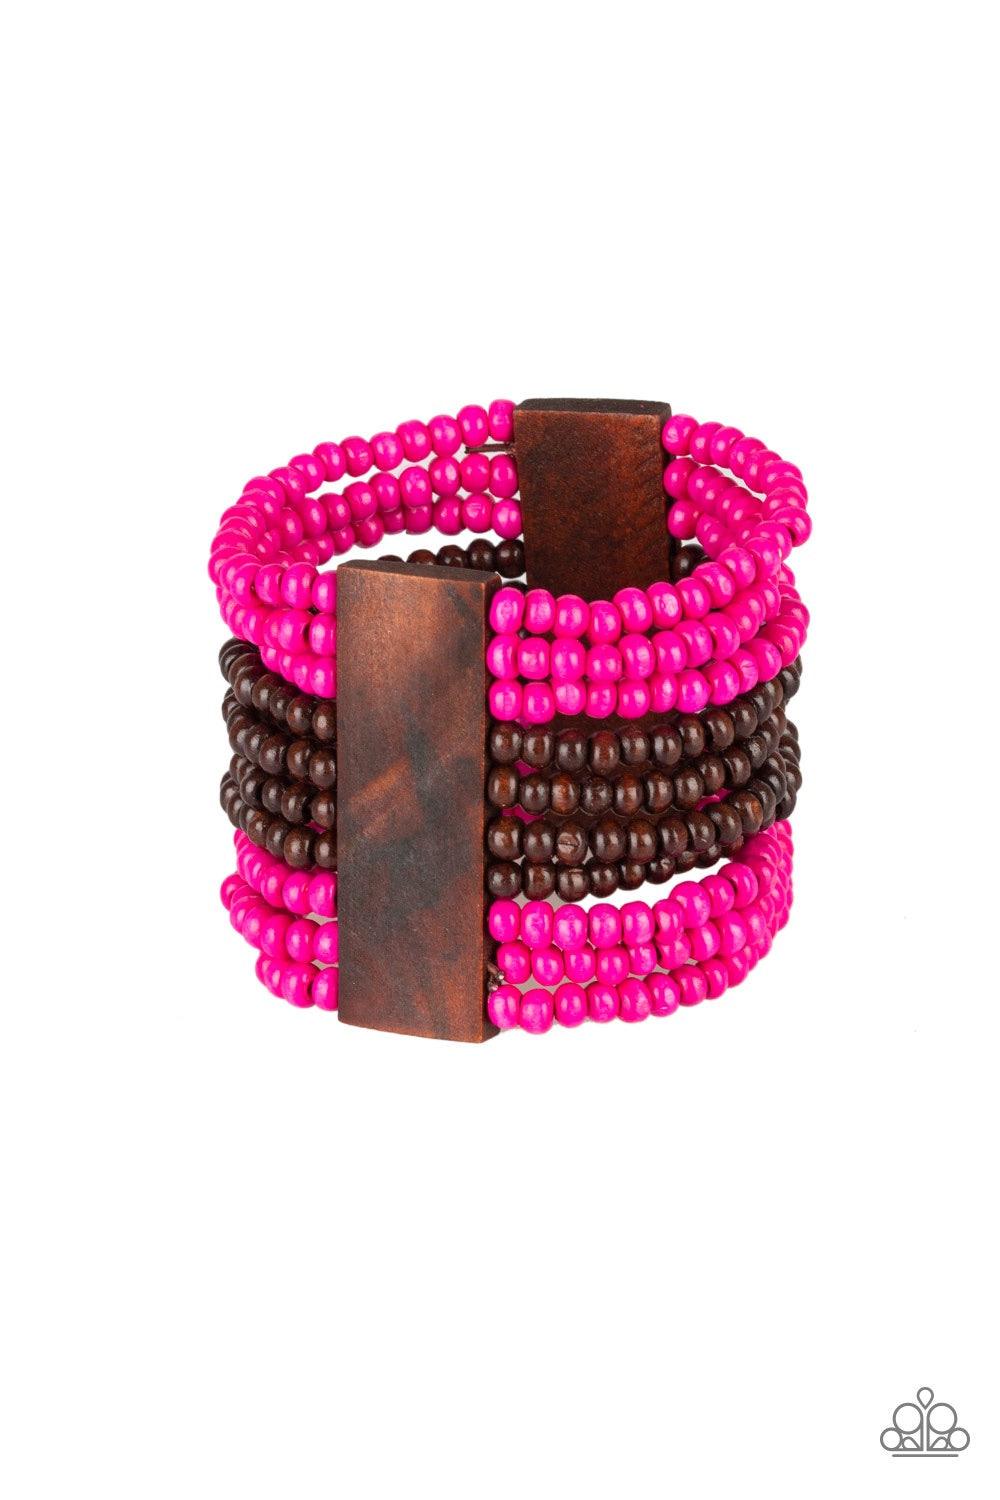 Paparazzi Accessories JAMAICAN Me Jam - Pink Infused with rectangular wooden beads, a collection of pink and brown wooden beads are threaded along stretchy bands for a summery flair. Jewelry